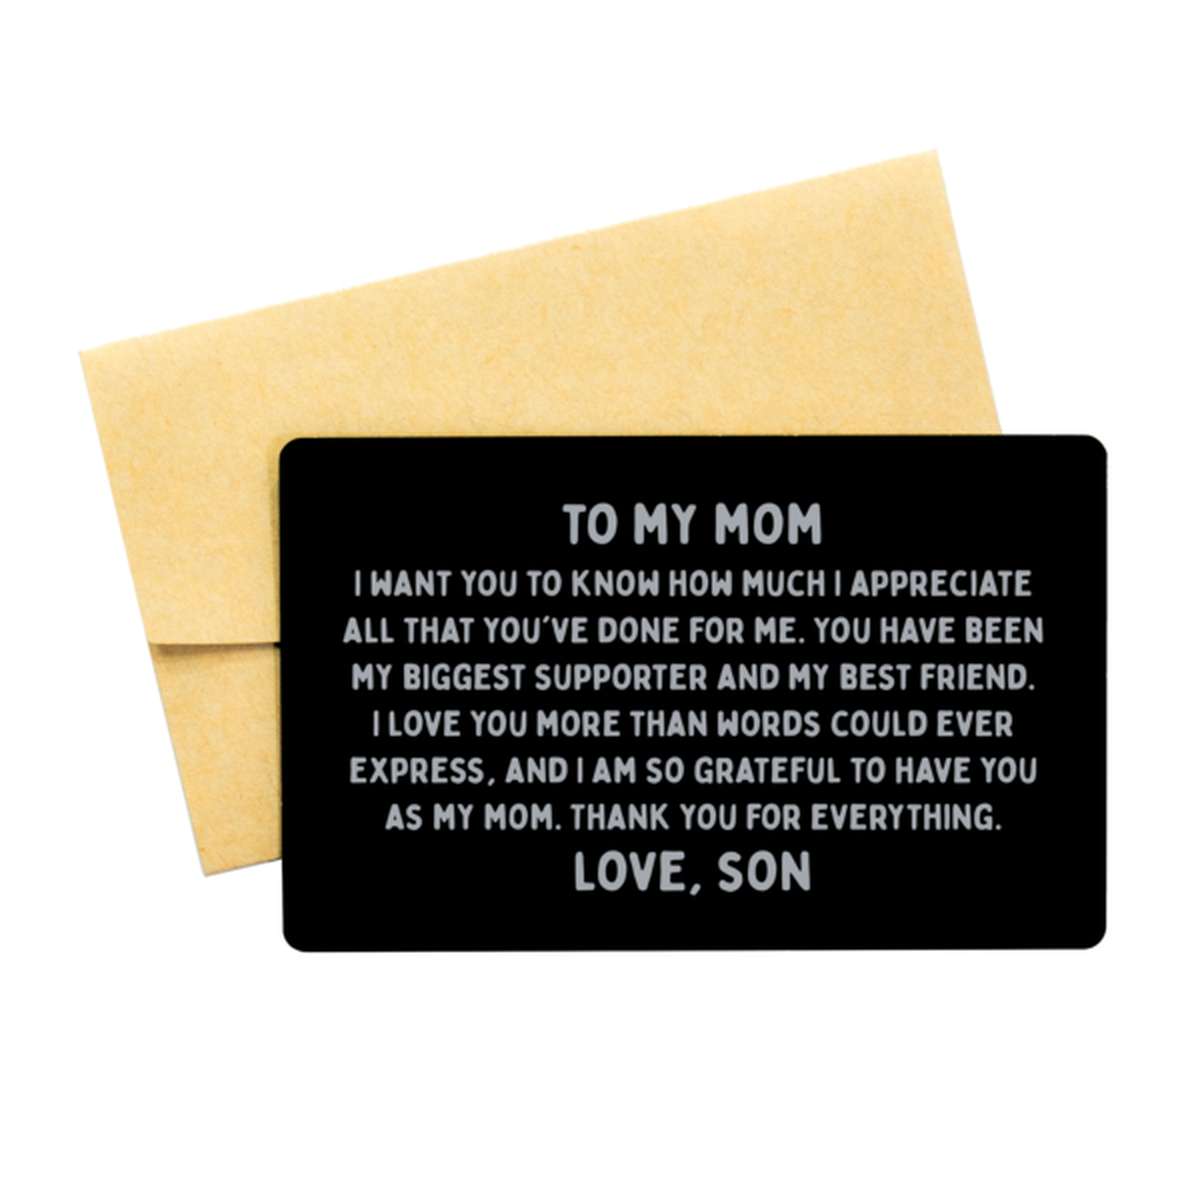 To My Mom From Son, Son to Mom Wallet Insert Card, Mother's Day Gifts from Son to Mom